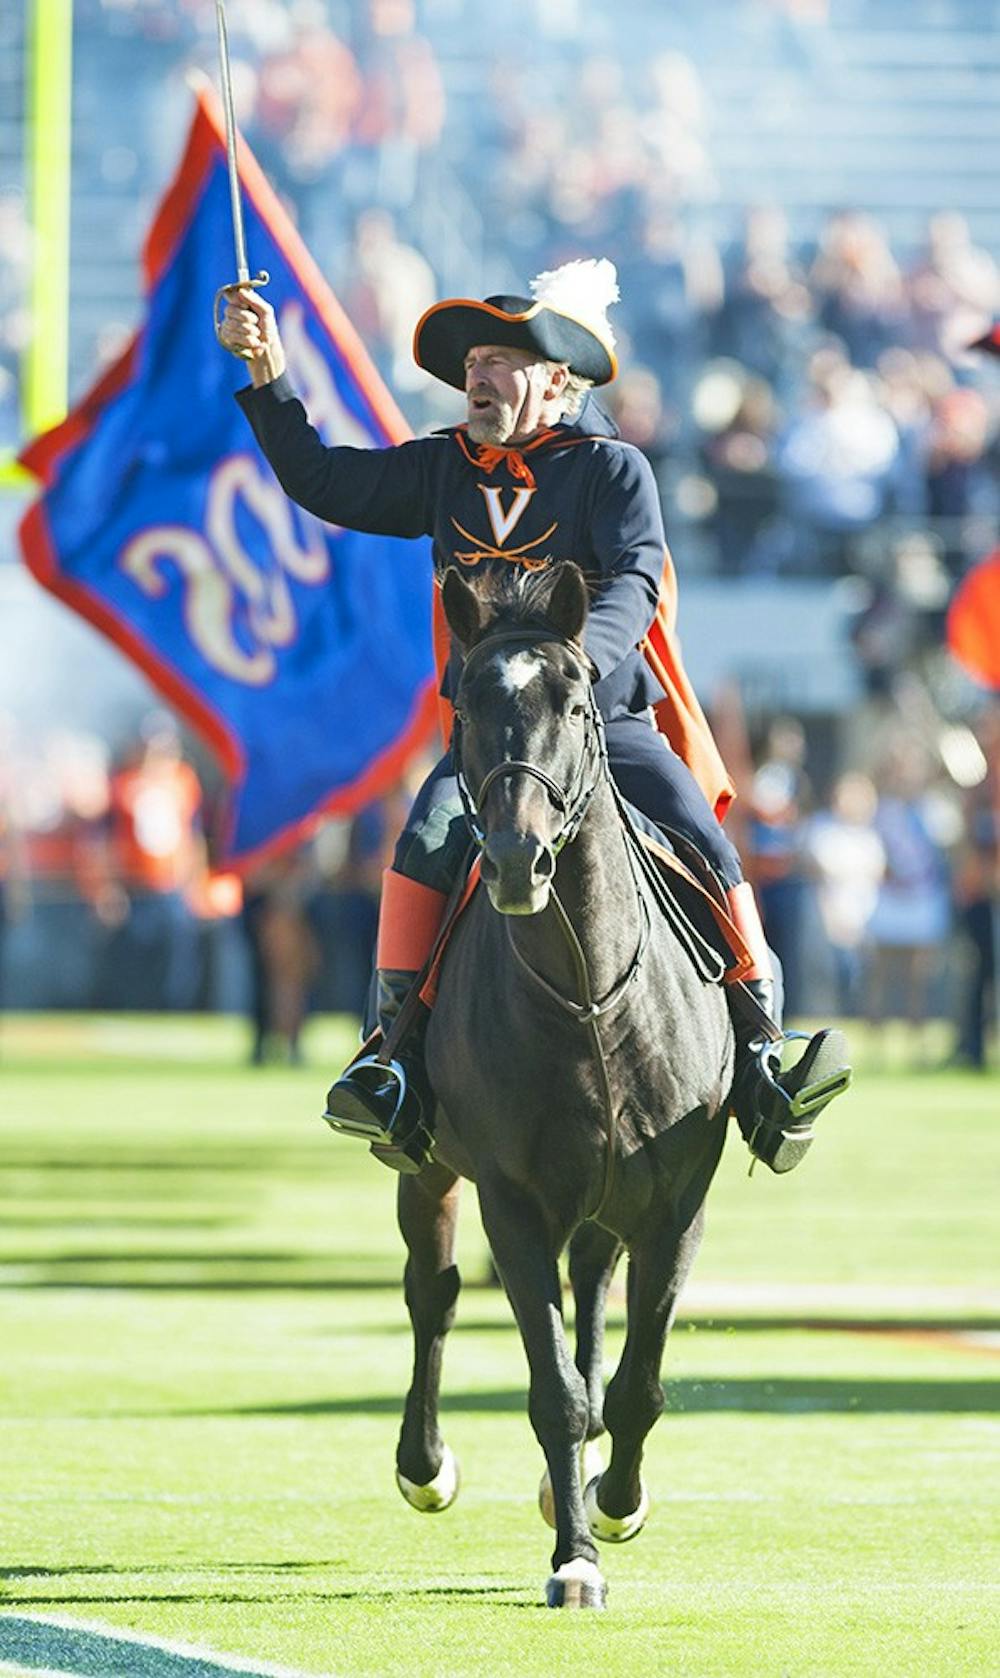 Though CavMan will continue to ride into Scott Stadium before games, his animated representation in "The Adventures of CavMan" will no longer be a part of Virginia football Saturdays